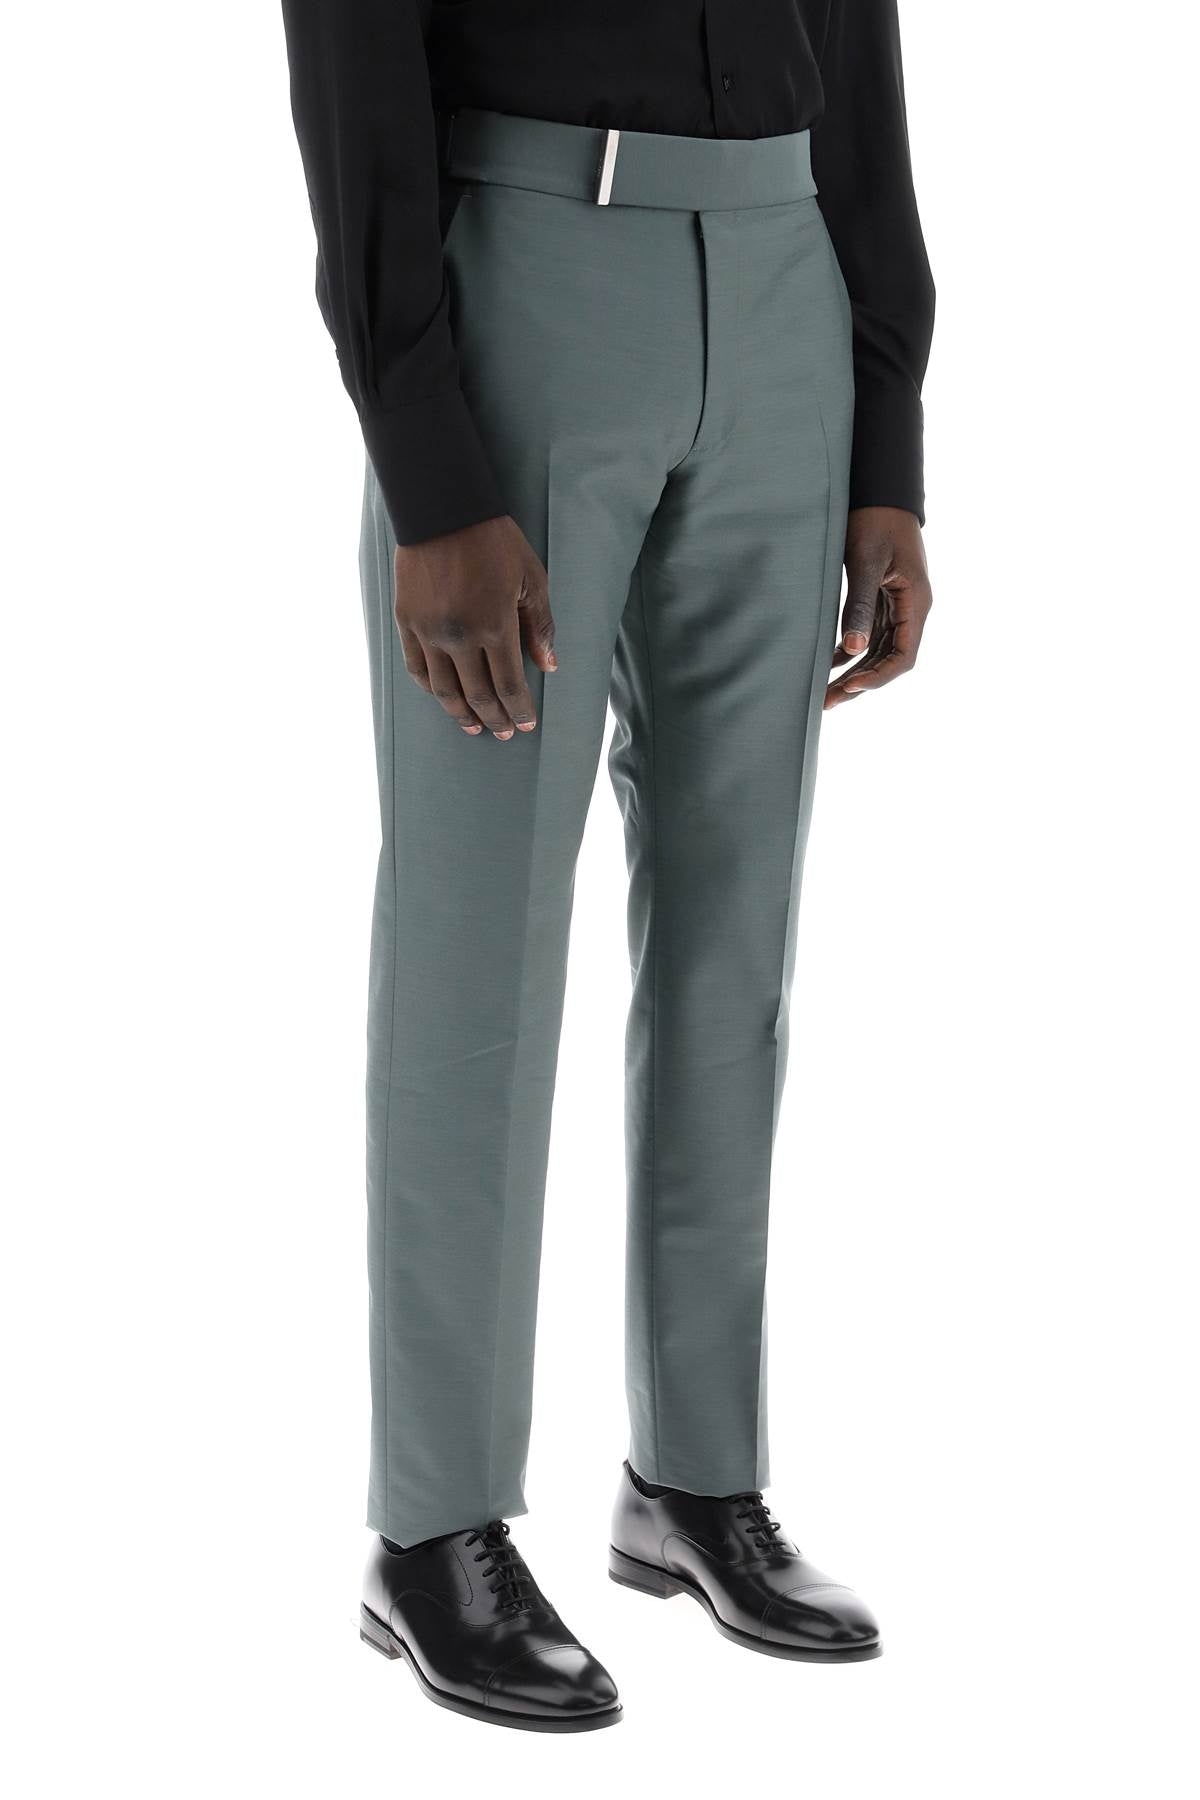 Tom ford atticus tailored trousers in mikado-1